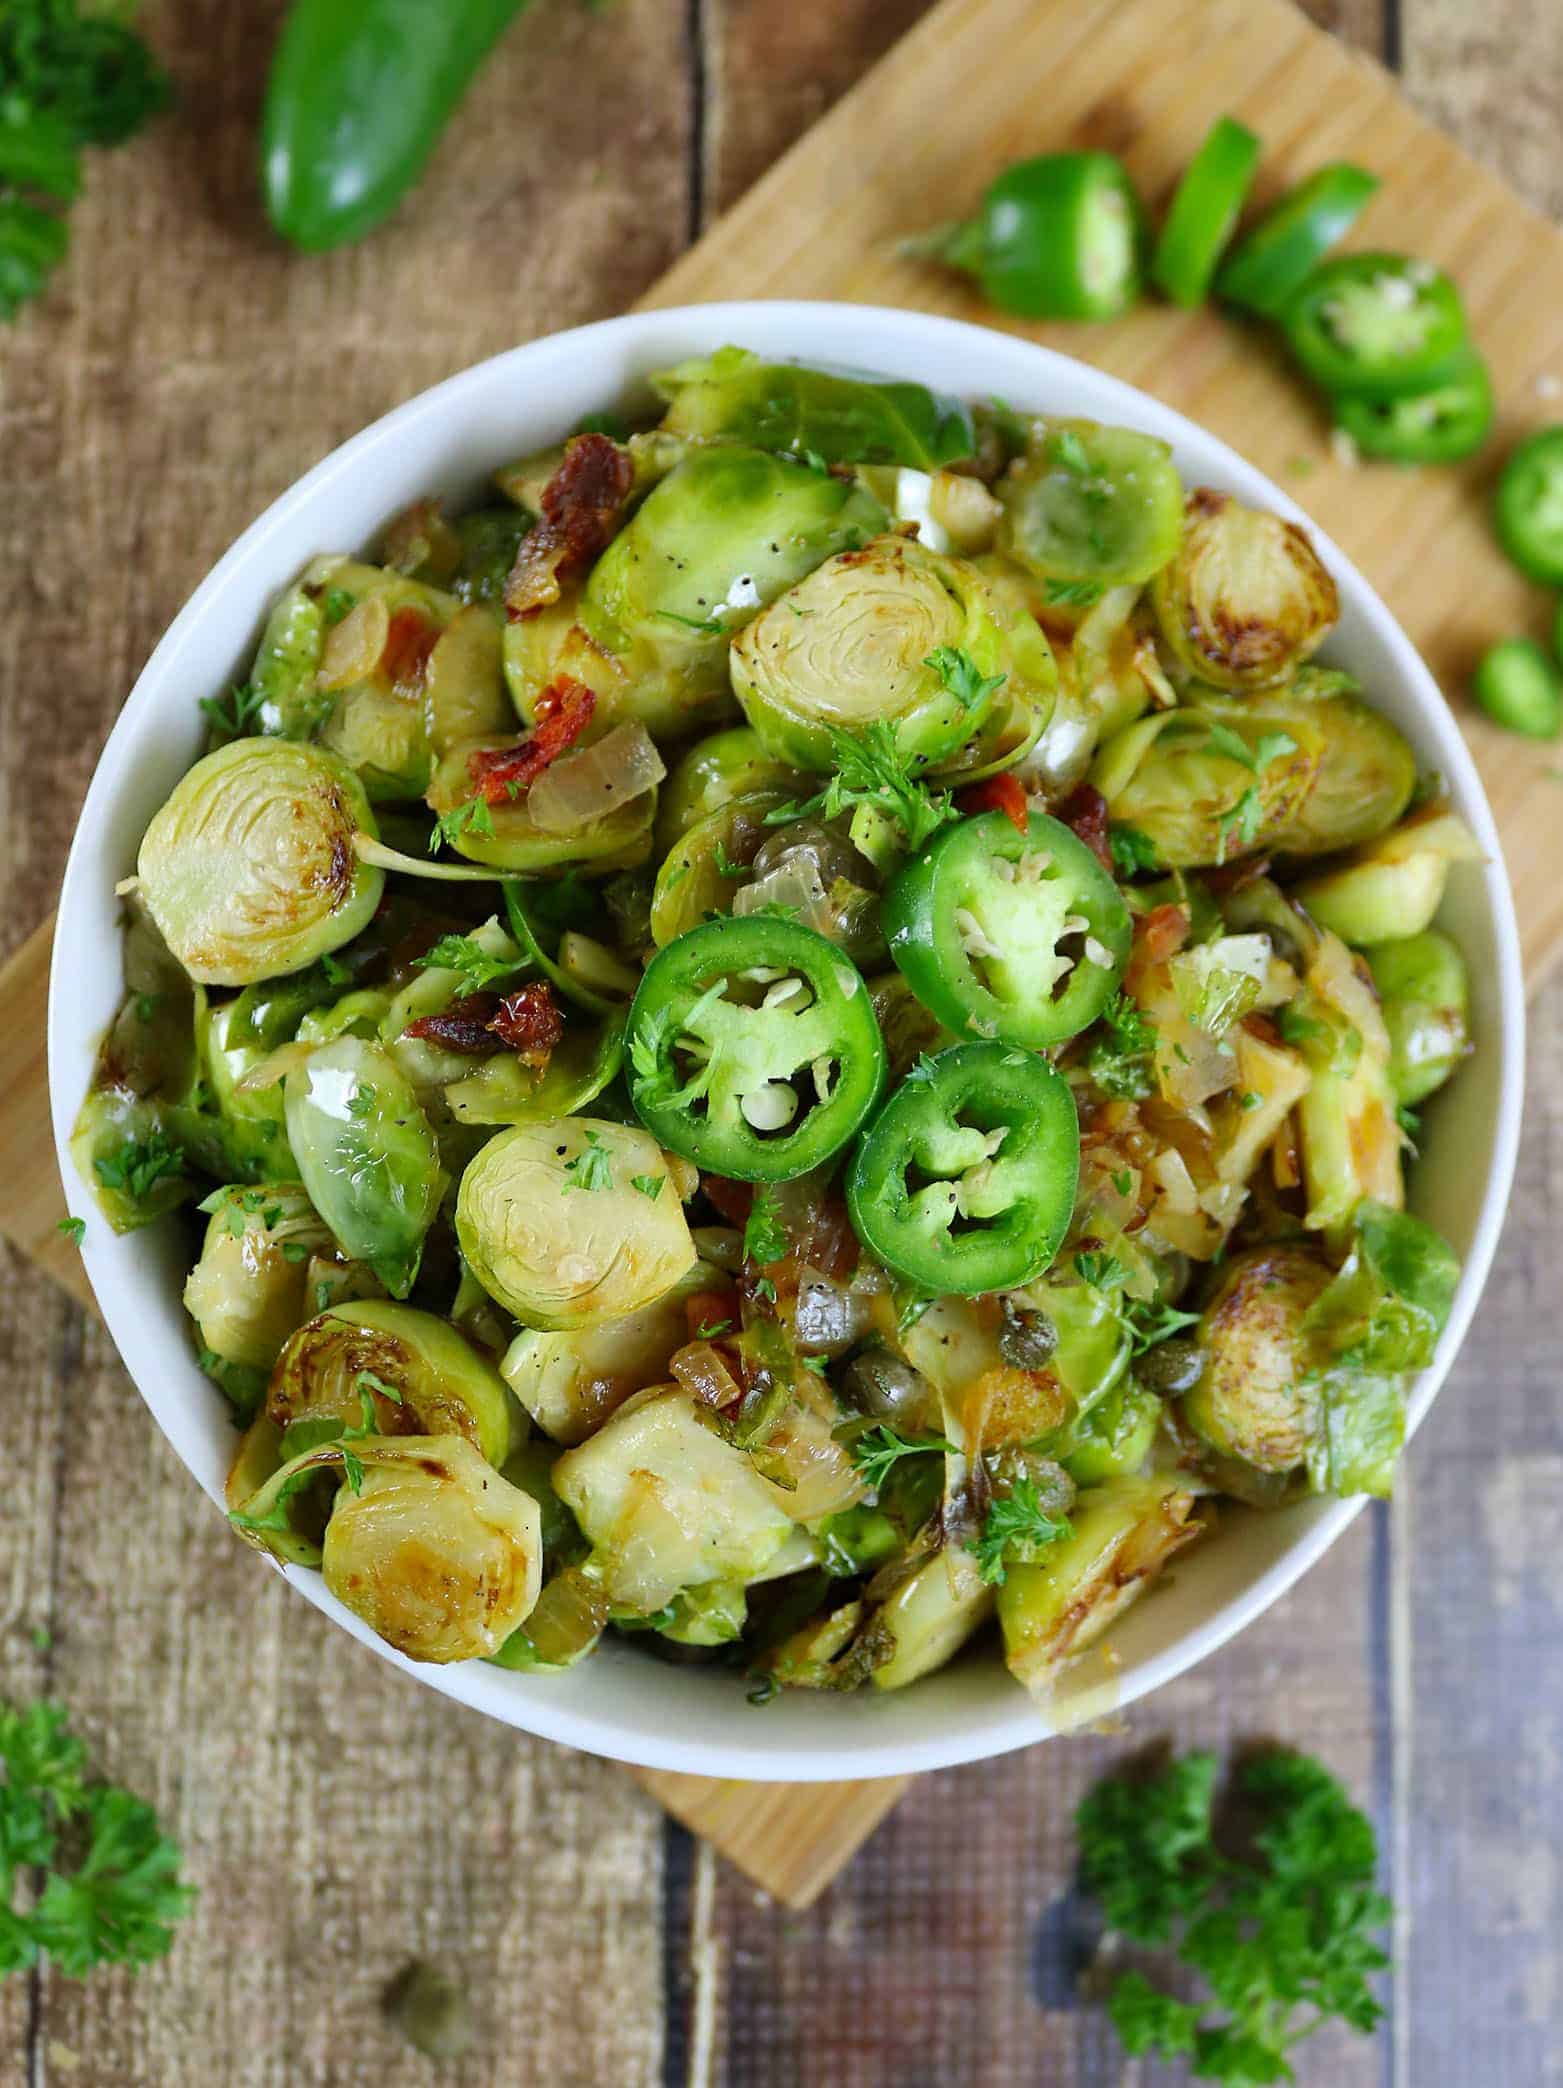 Capered Brussels Sprouts